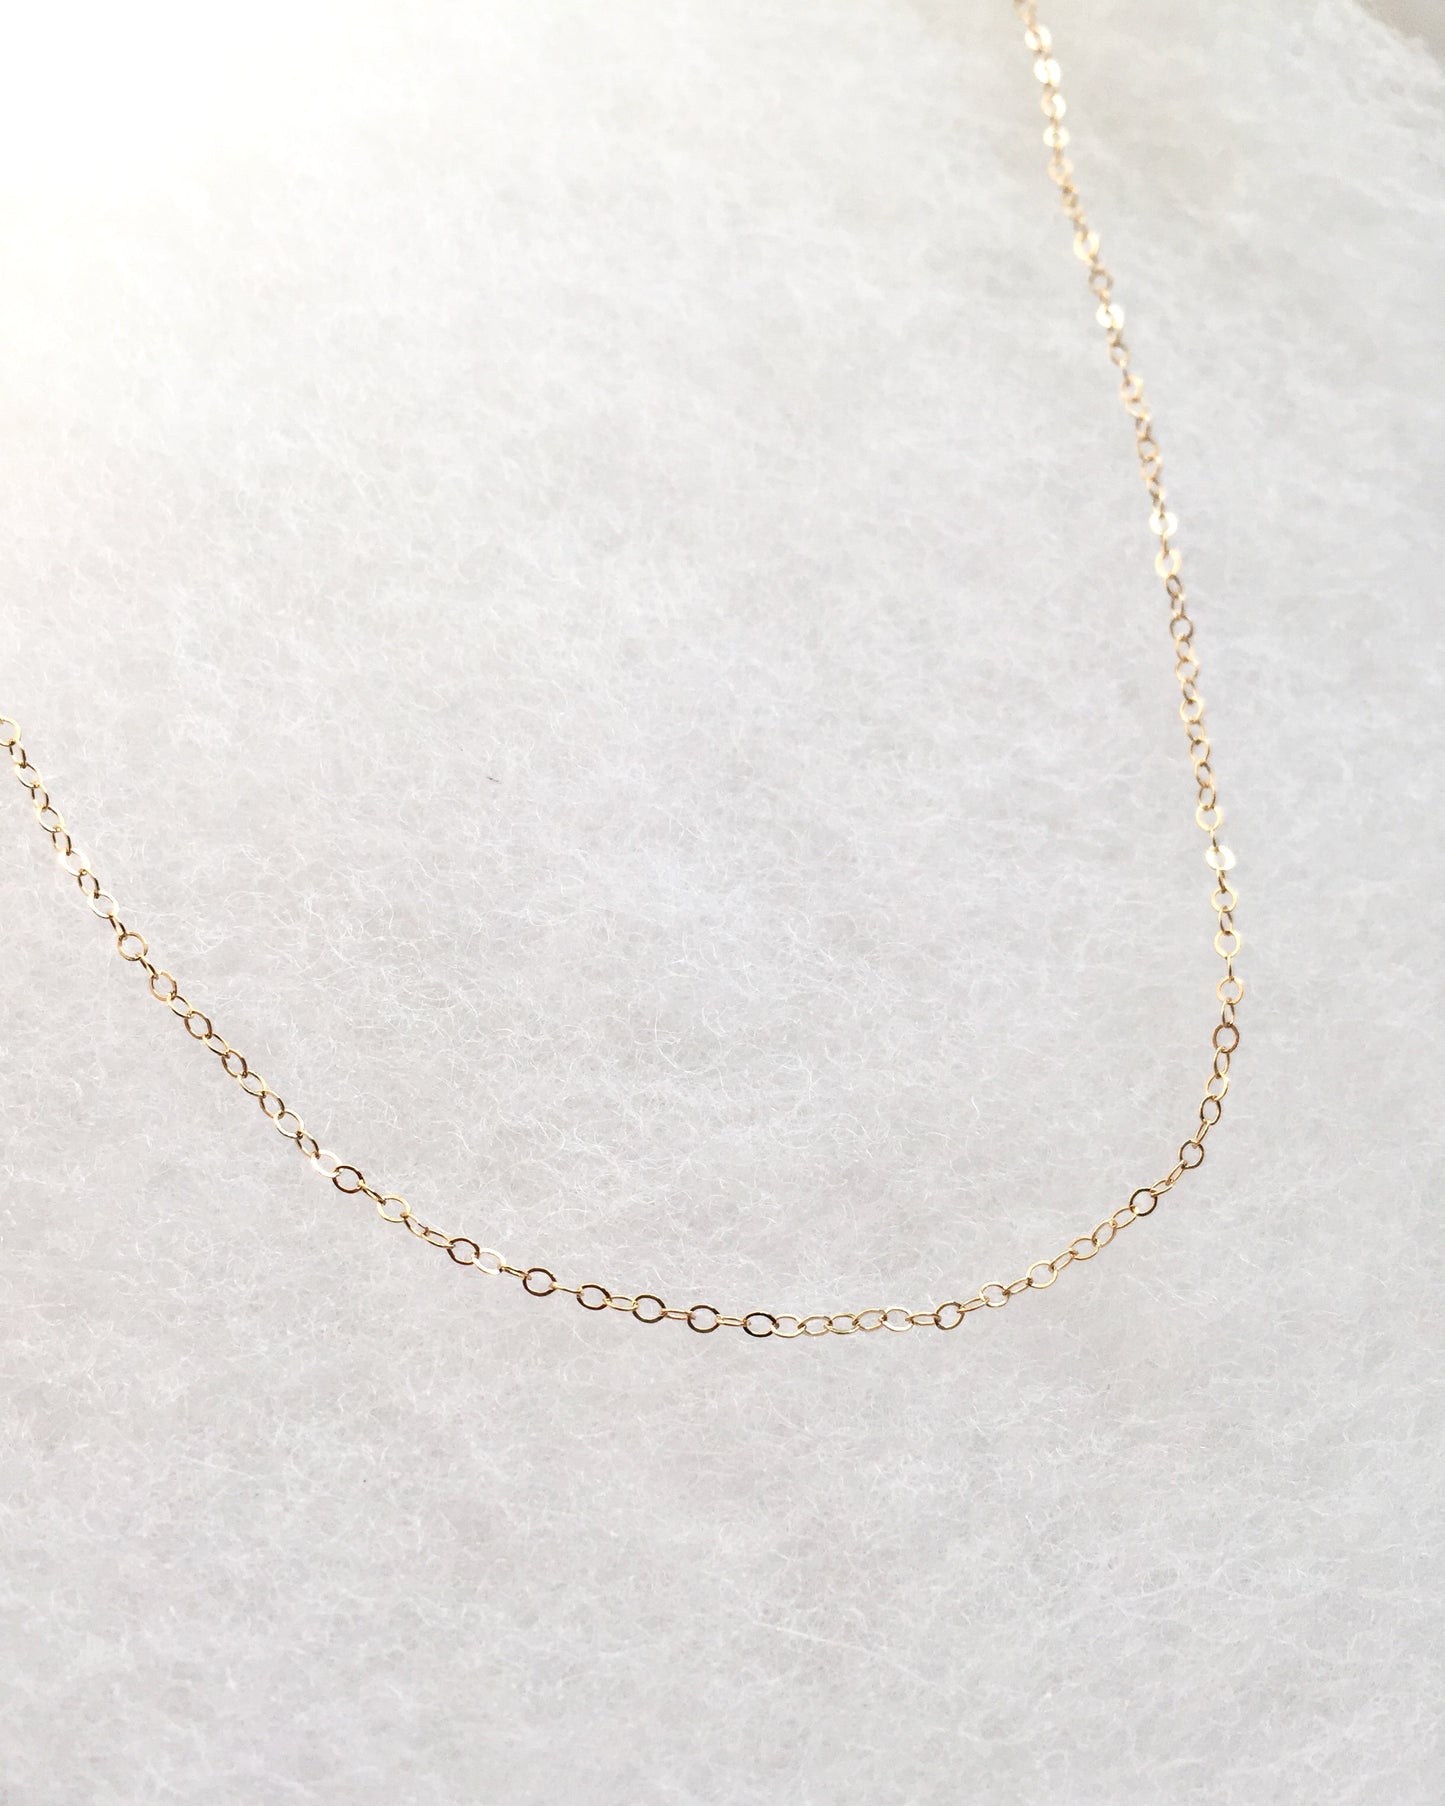 Dainty Short Chain Necklace in Gold Filled or Sterling Silver | IB Jewelry